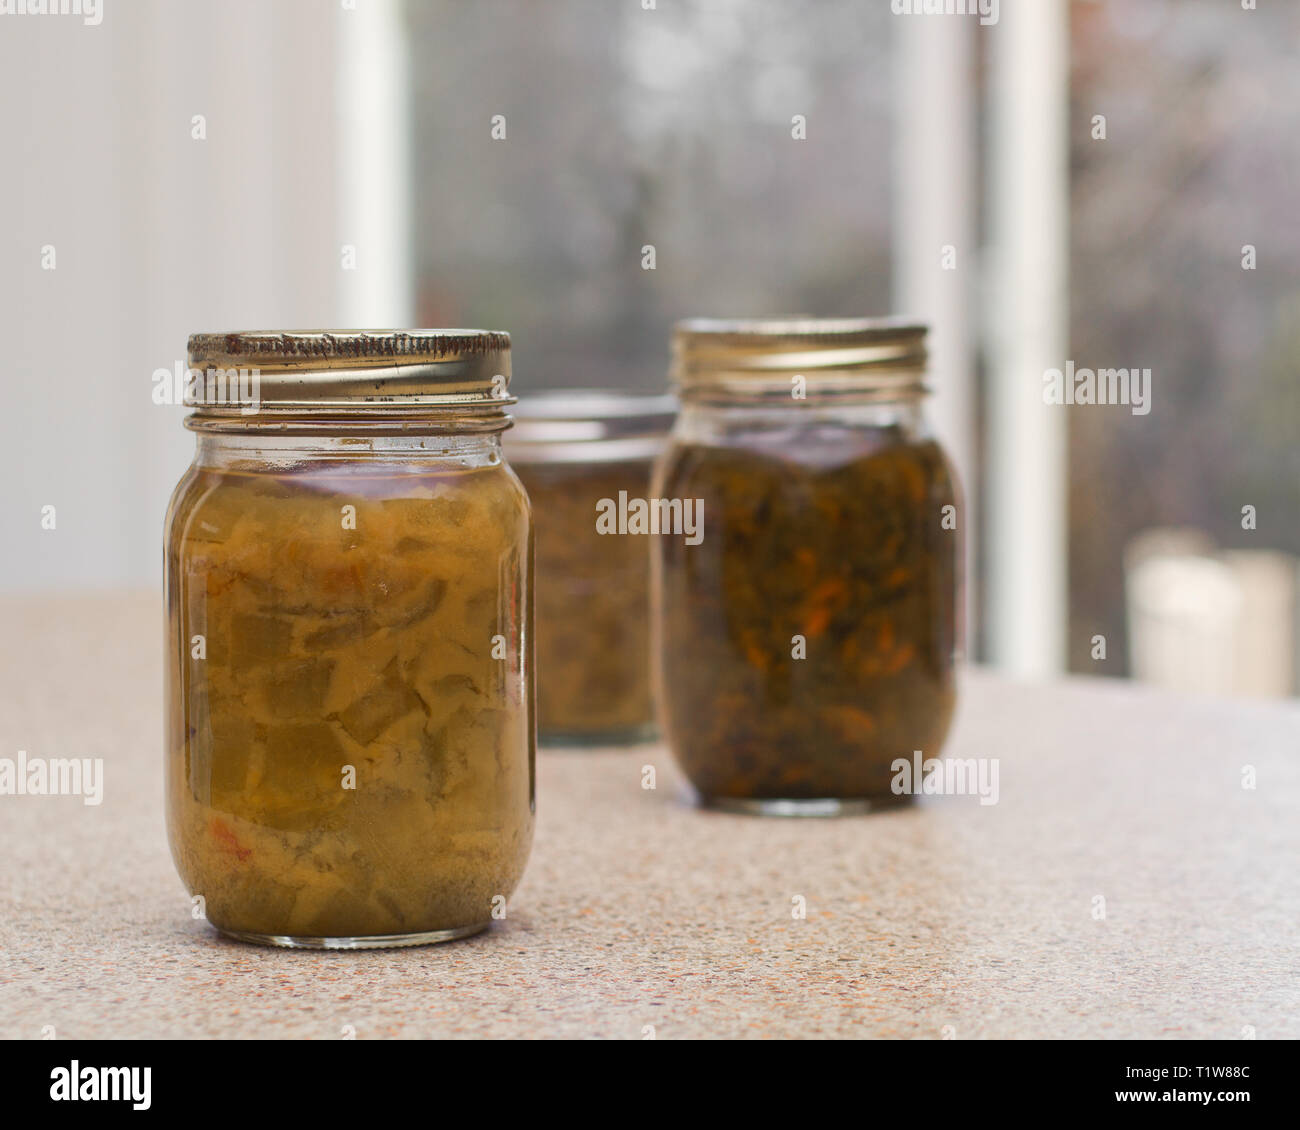 Homemade pickled relish bottles on kitchen counter top. Stock Photo